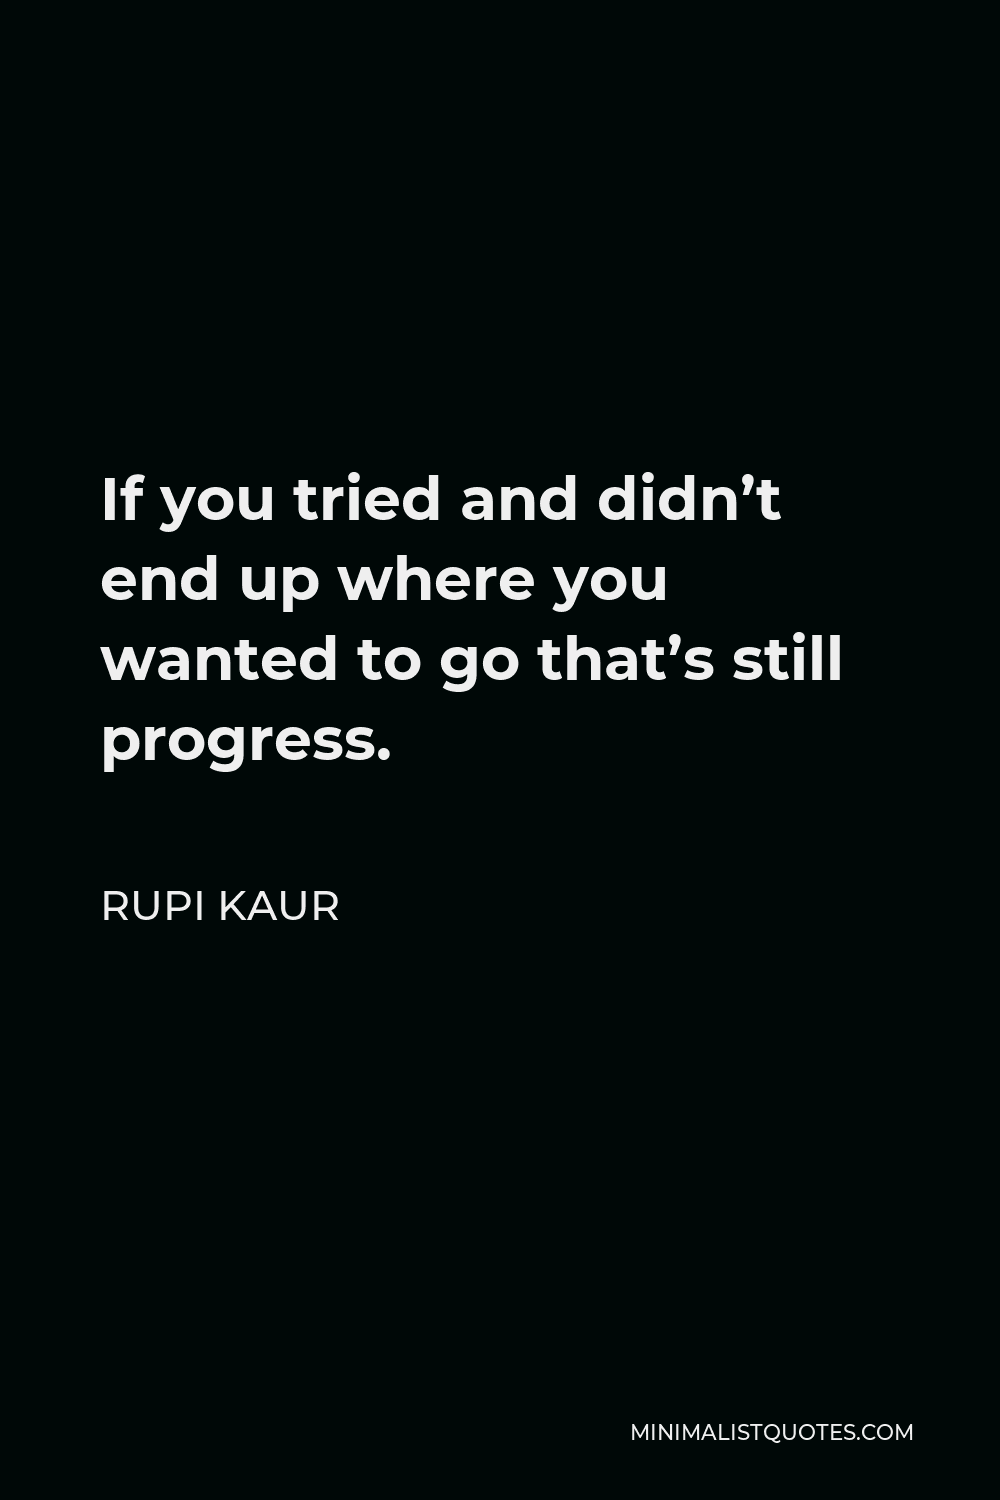 Rupi Kaur Quote - If you tried and didn’t end up where you wanted to go that’s still progress.